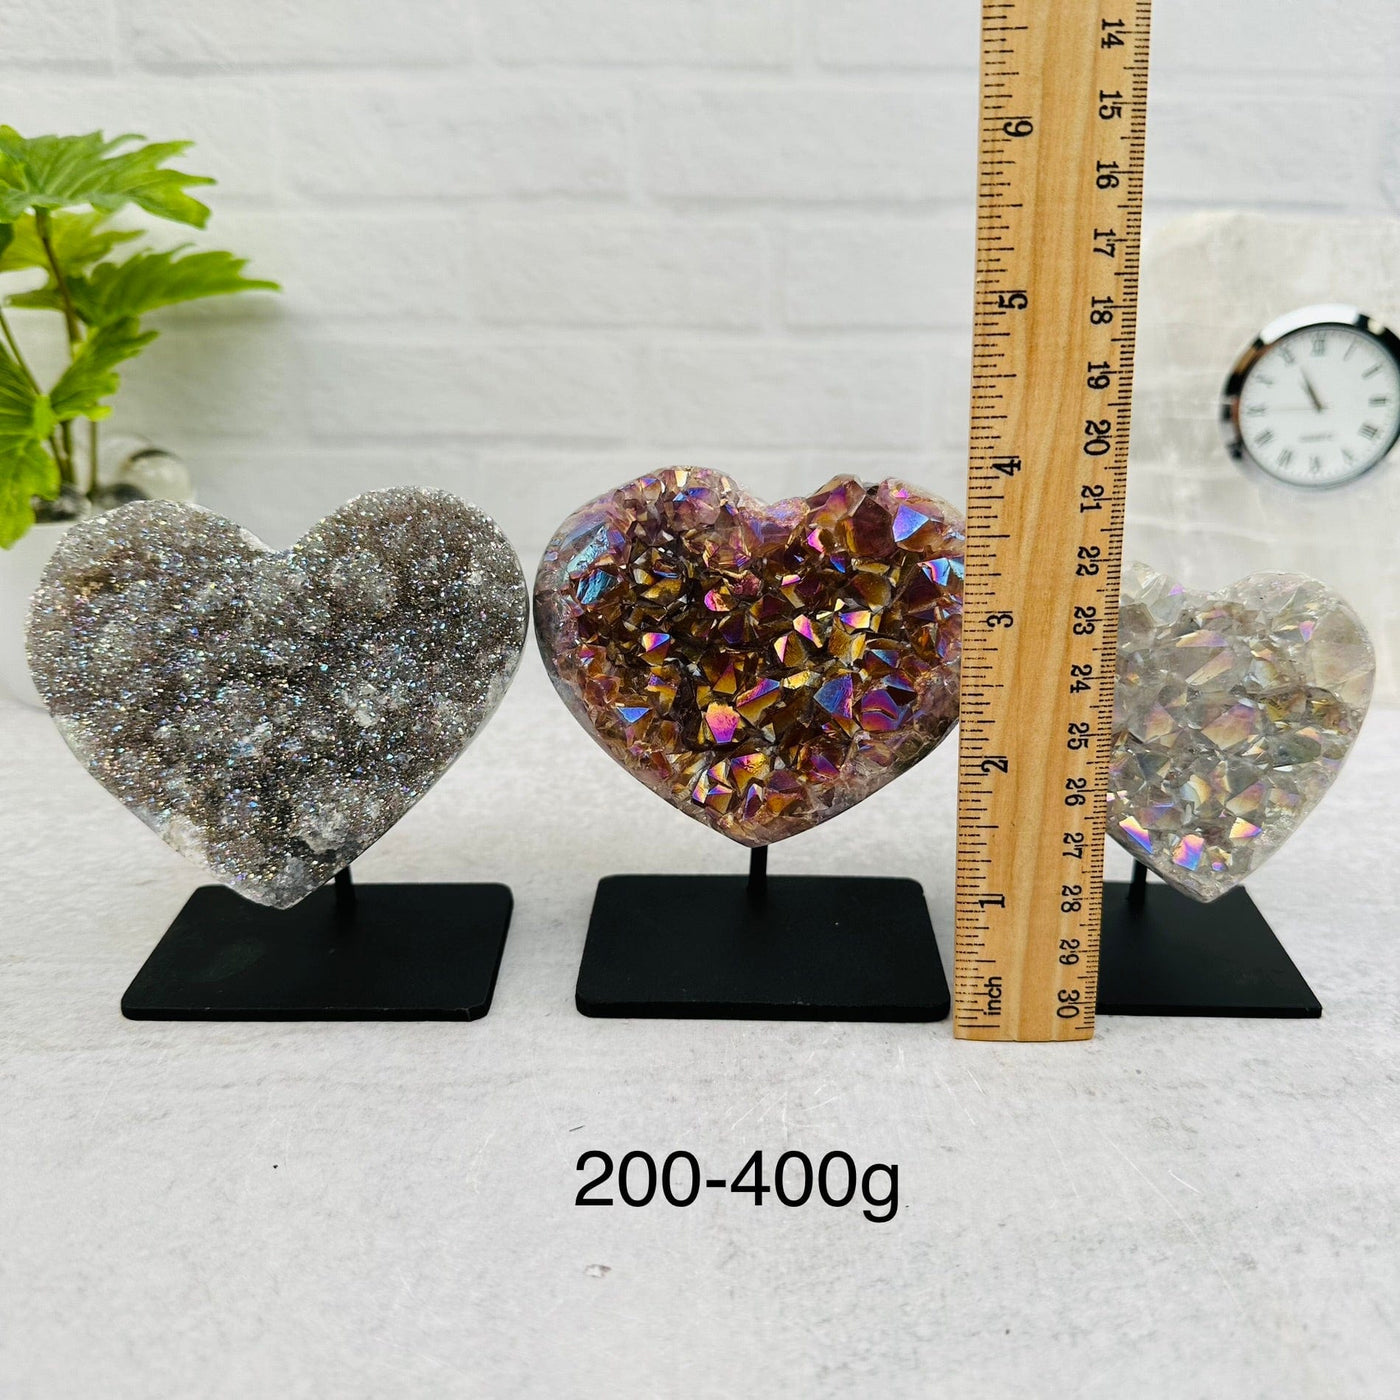 Amethyst Druzy Crystal Heart with Angel Aura on Metal Stand by weight. next to a ruler for size reference 